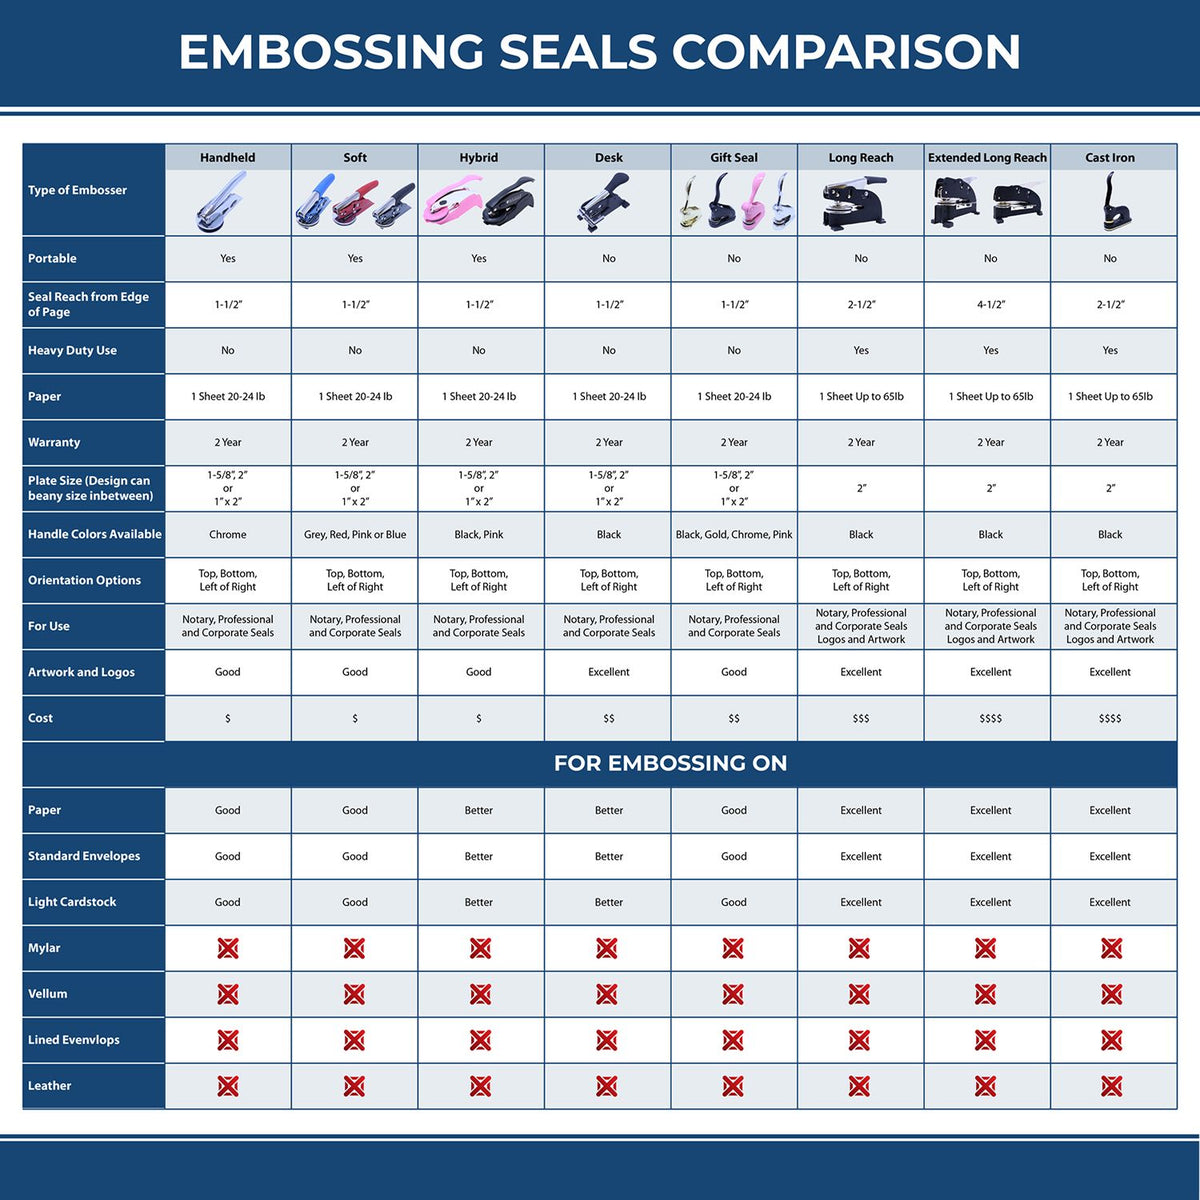 A comparison chart for the different types of mount models available for the State of Louisiana Soft Land Surveyor Embossing Seal.